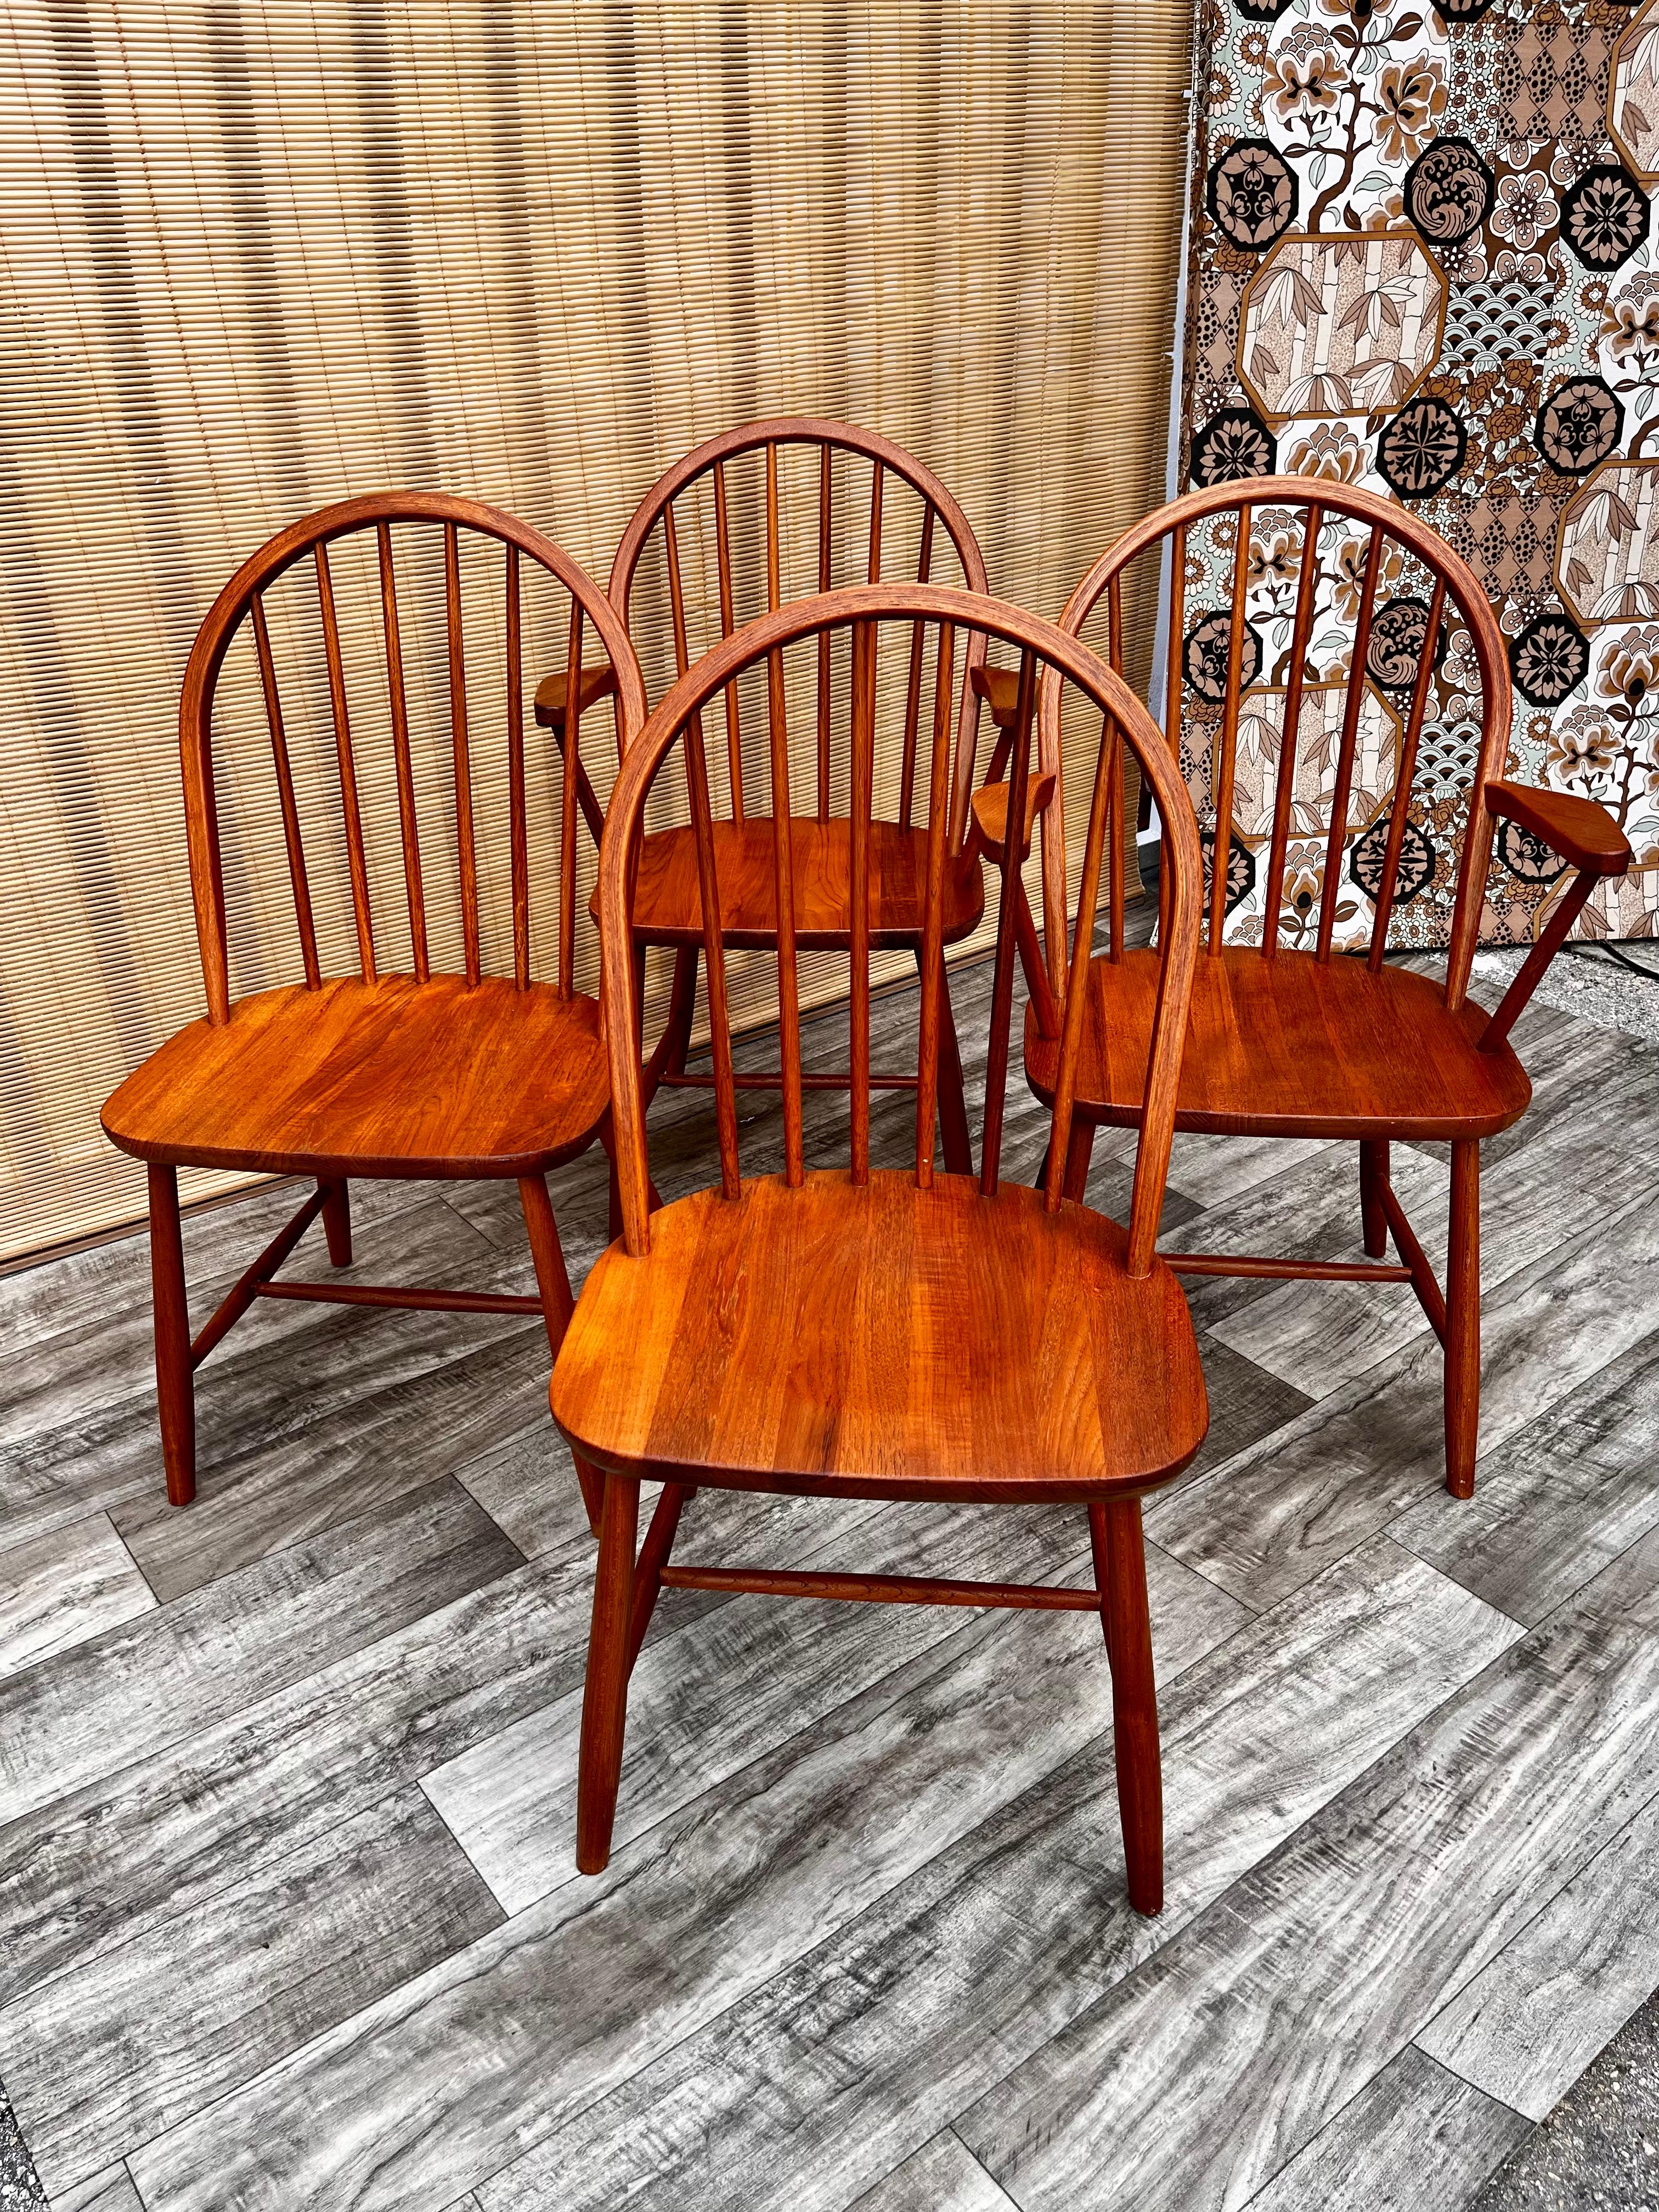 Set of 4 Mid Century Danish Modern Dining Chairs Attributed to Erik Ole Jørgensen for Tarm Stole Mobelfabrik. Manufactured in 1985
Two Captain Chairs and two Side chairs 
Feature a sleek Mid-Century Modern Scandinavian design with hooped backs